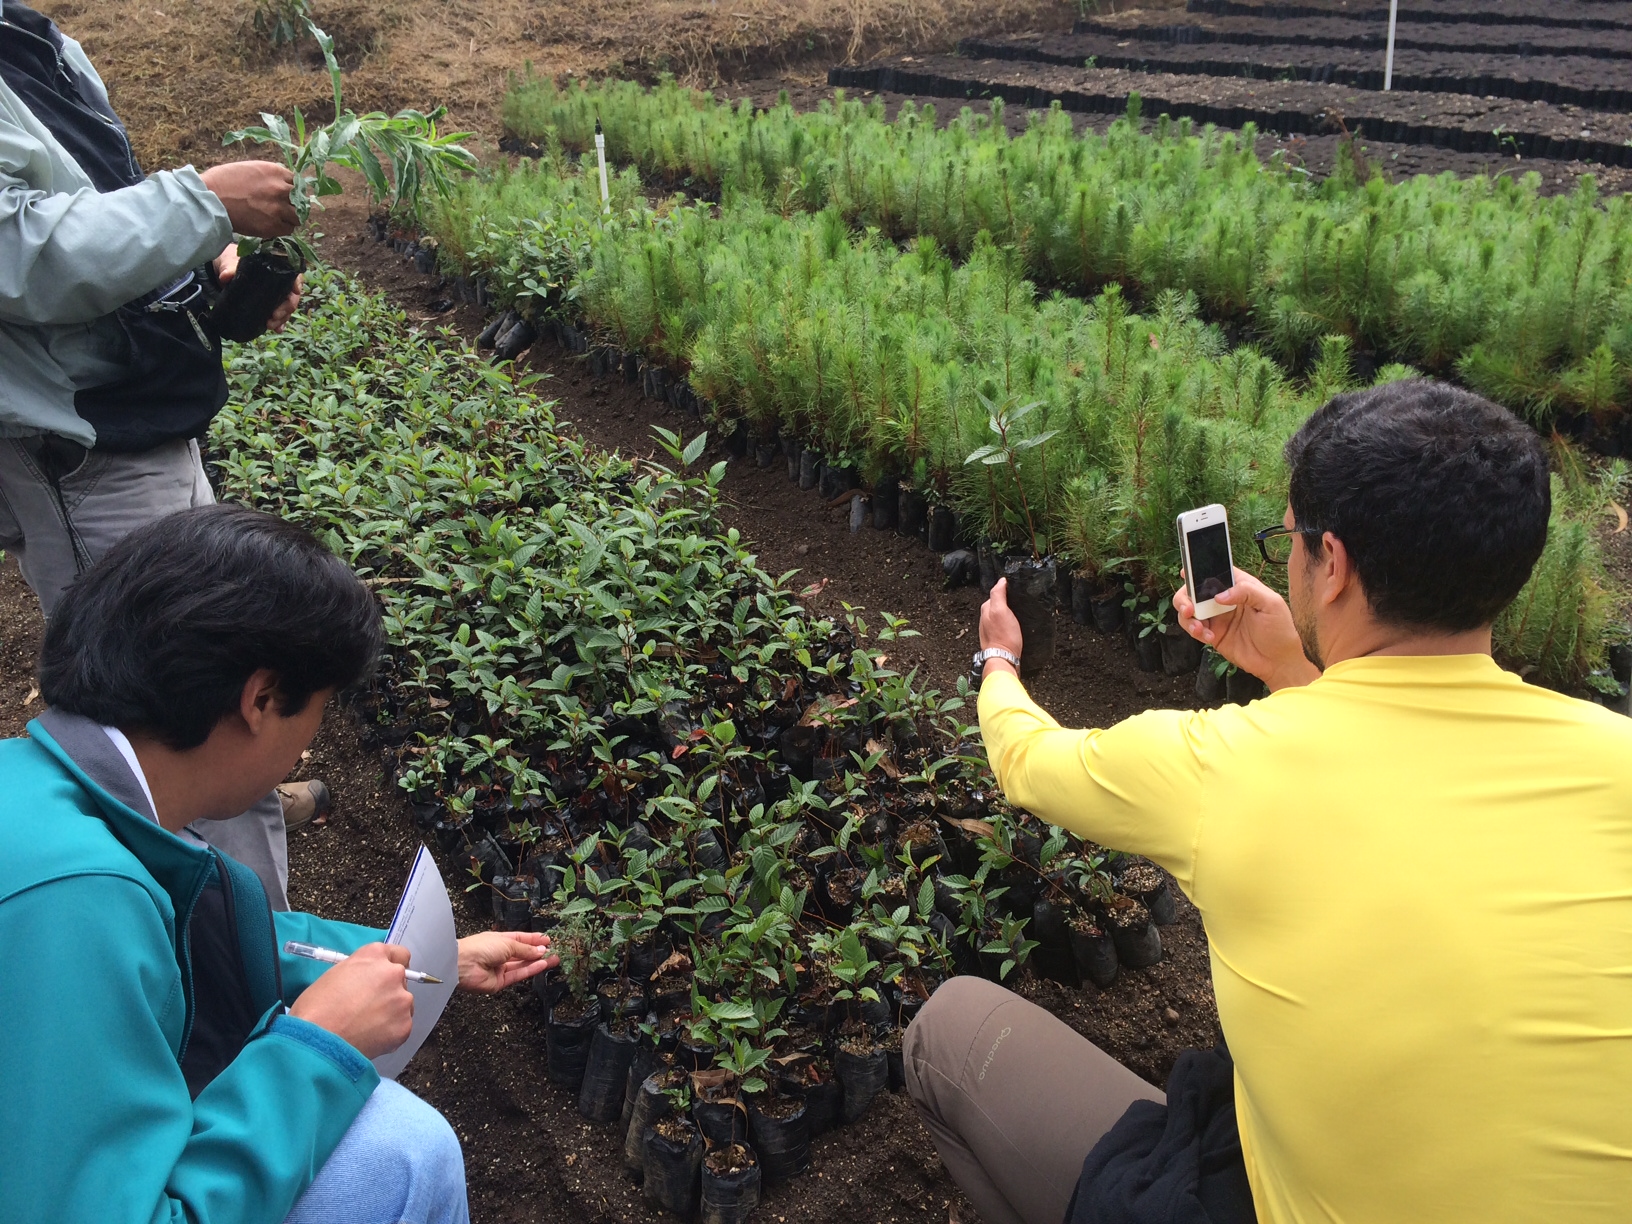 Visitors from other countries learn about landscape restoration in Guatemala. These young seedlings will be used to restore steep-sloping land in central Guatemala.